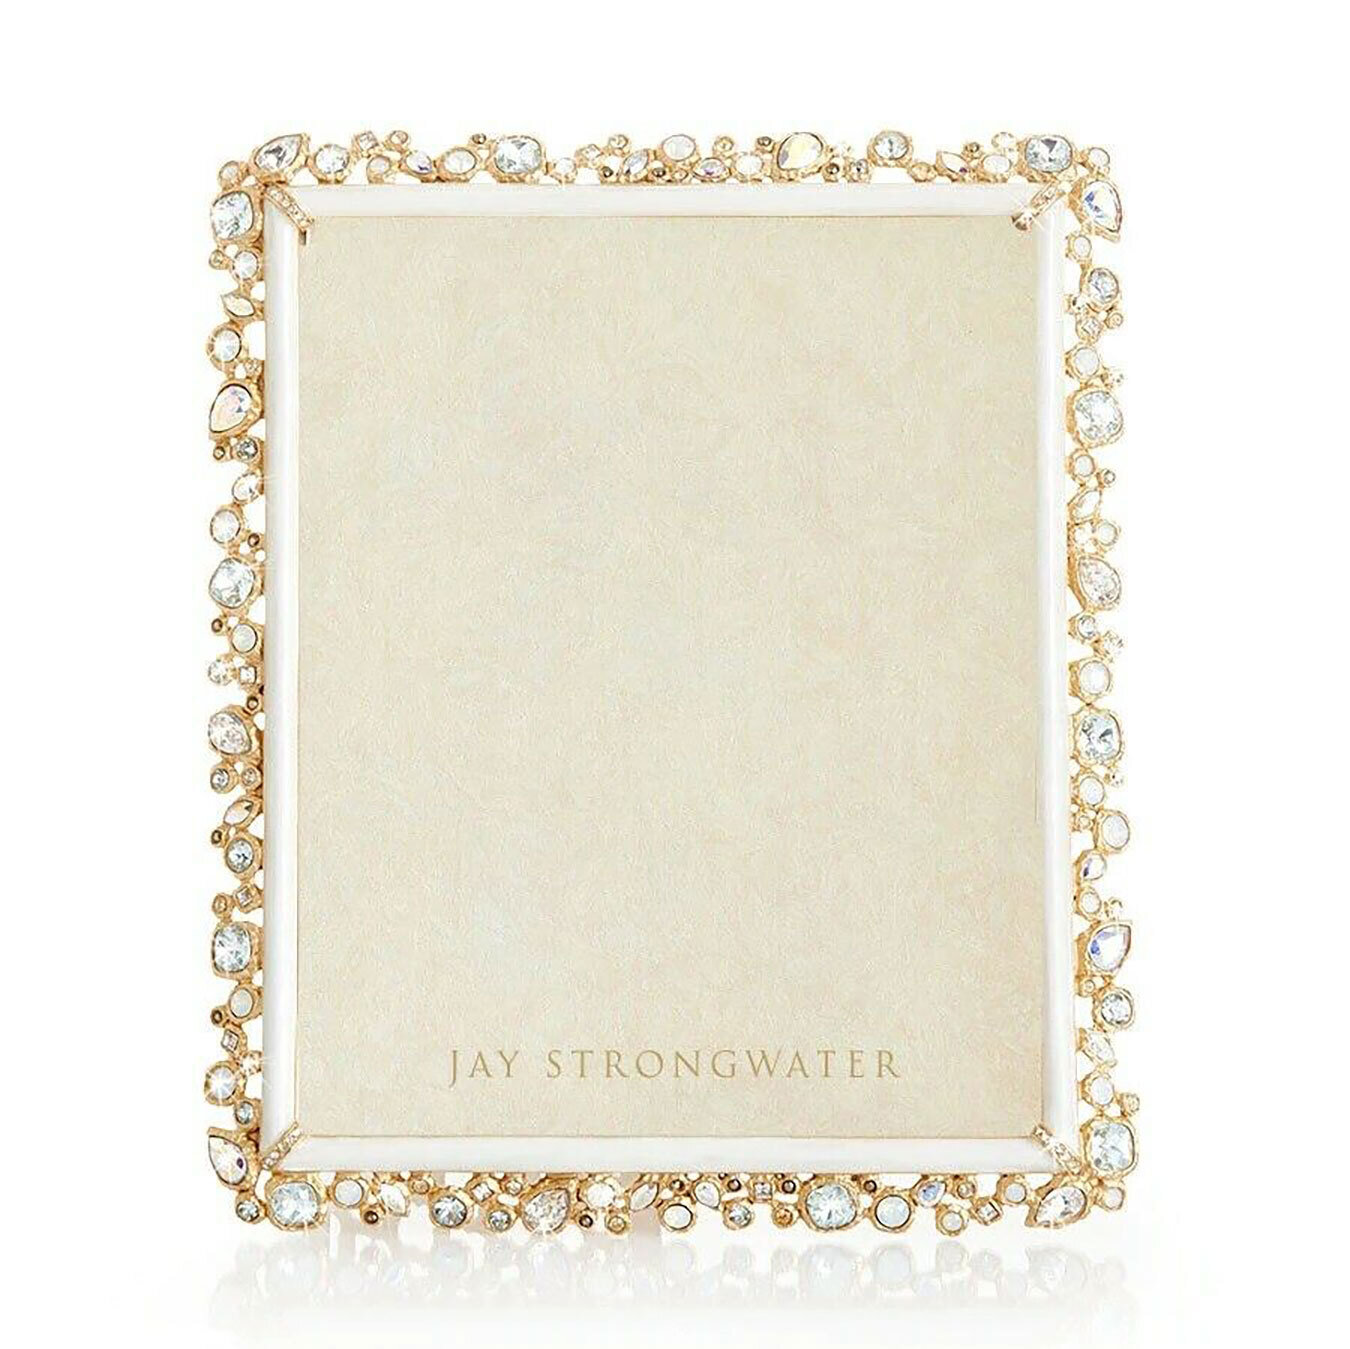 Jay Strongwater Bejeweled 8 x 10 Inch Picture Frame SPF5843-219